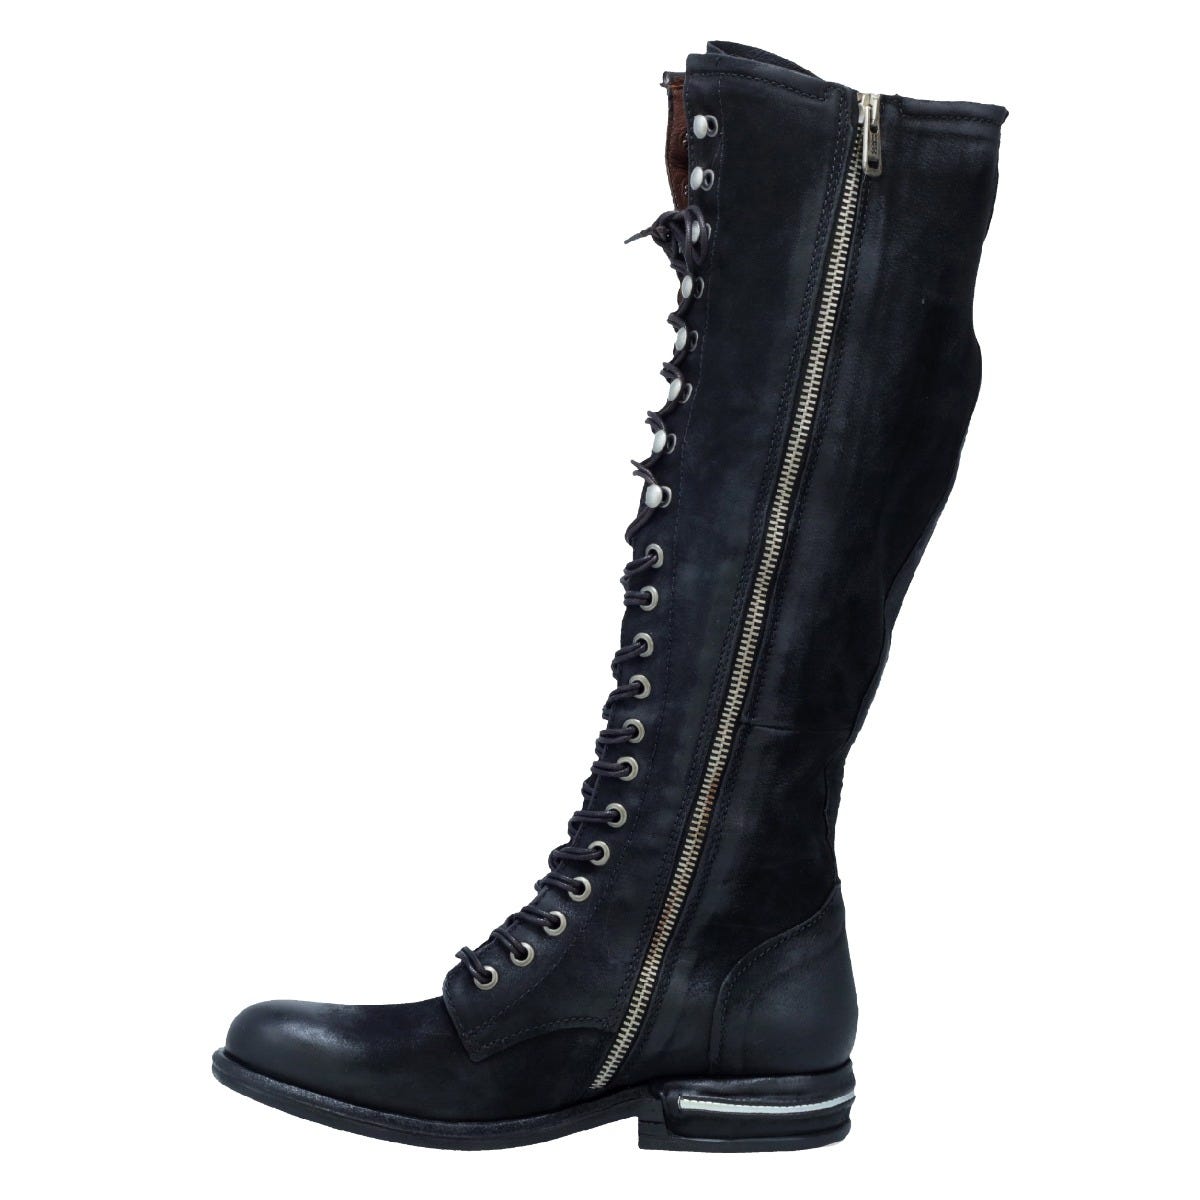 Inner side view of the a.s.98 trillie tall boot in black. This flat knee-high leather boot has a lace up front, an inner side zipper, and a silver line in the heel. 